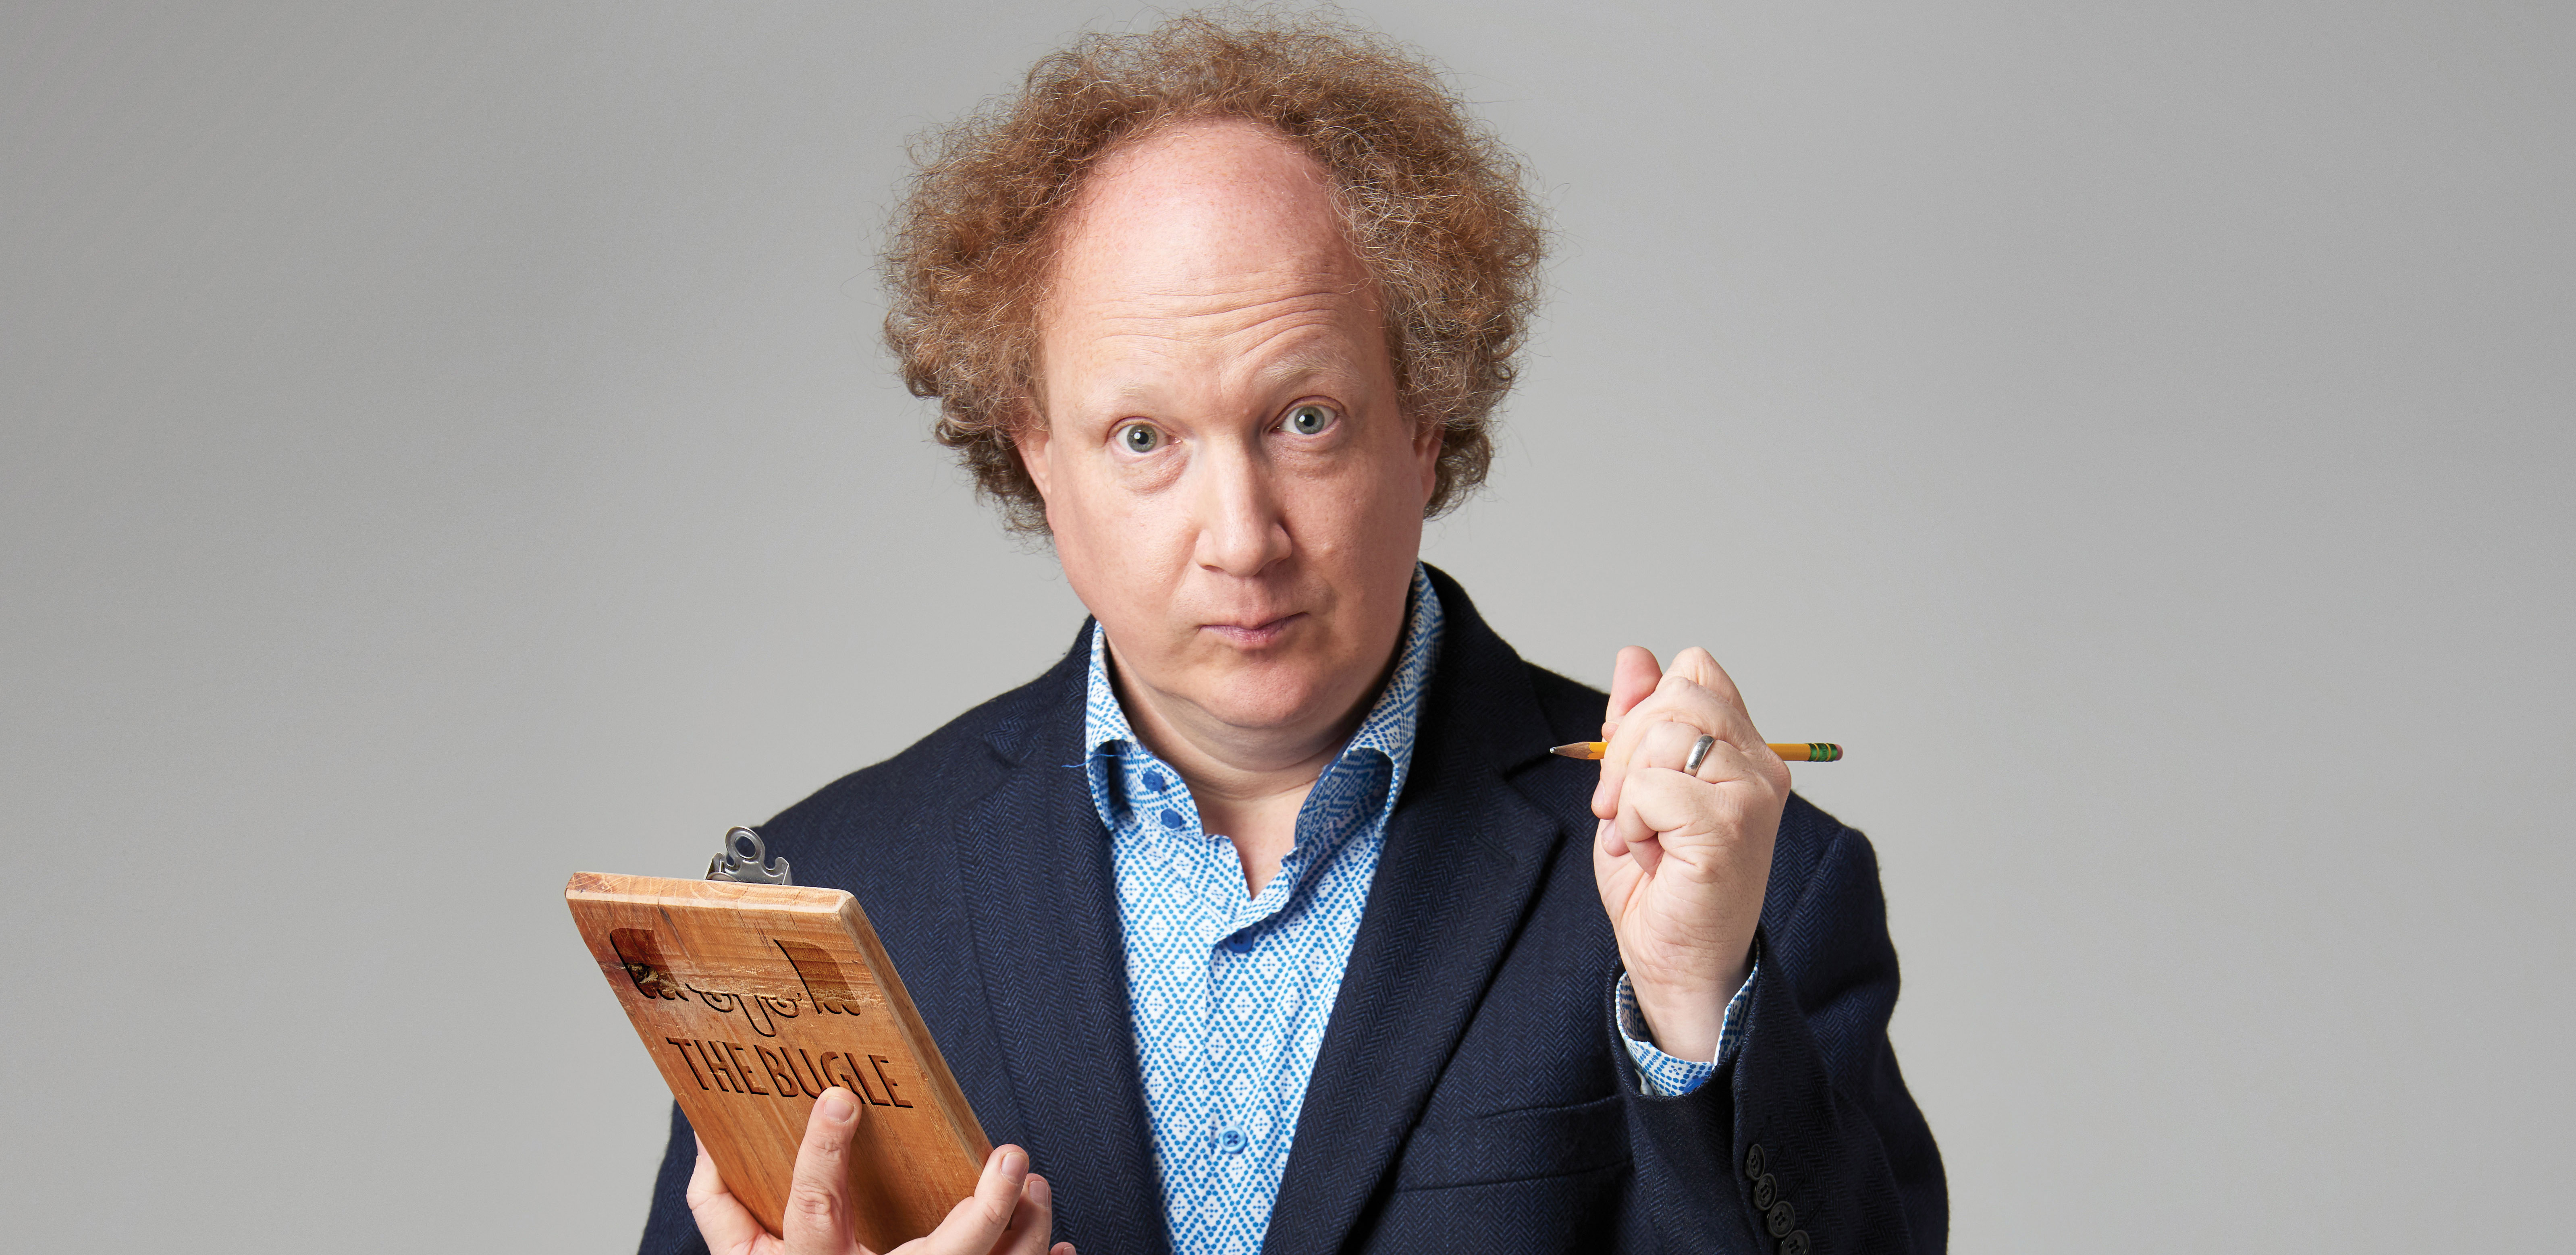 HOST OF GLOBAL HIT SATIRICAL PODCAST, ANDY ZALTZMAN ROUNDS UP THE YEAR AT SOHO THEATRE WITH ‘2018: THE CERTIFIABLE HISTORY’